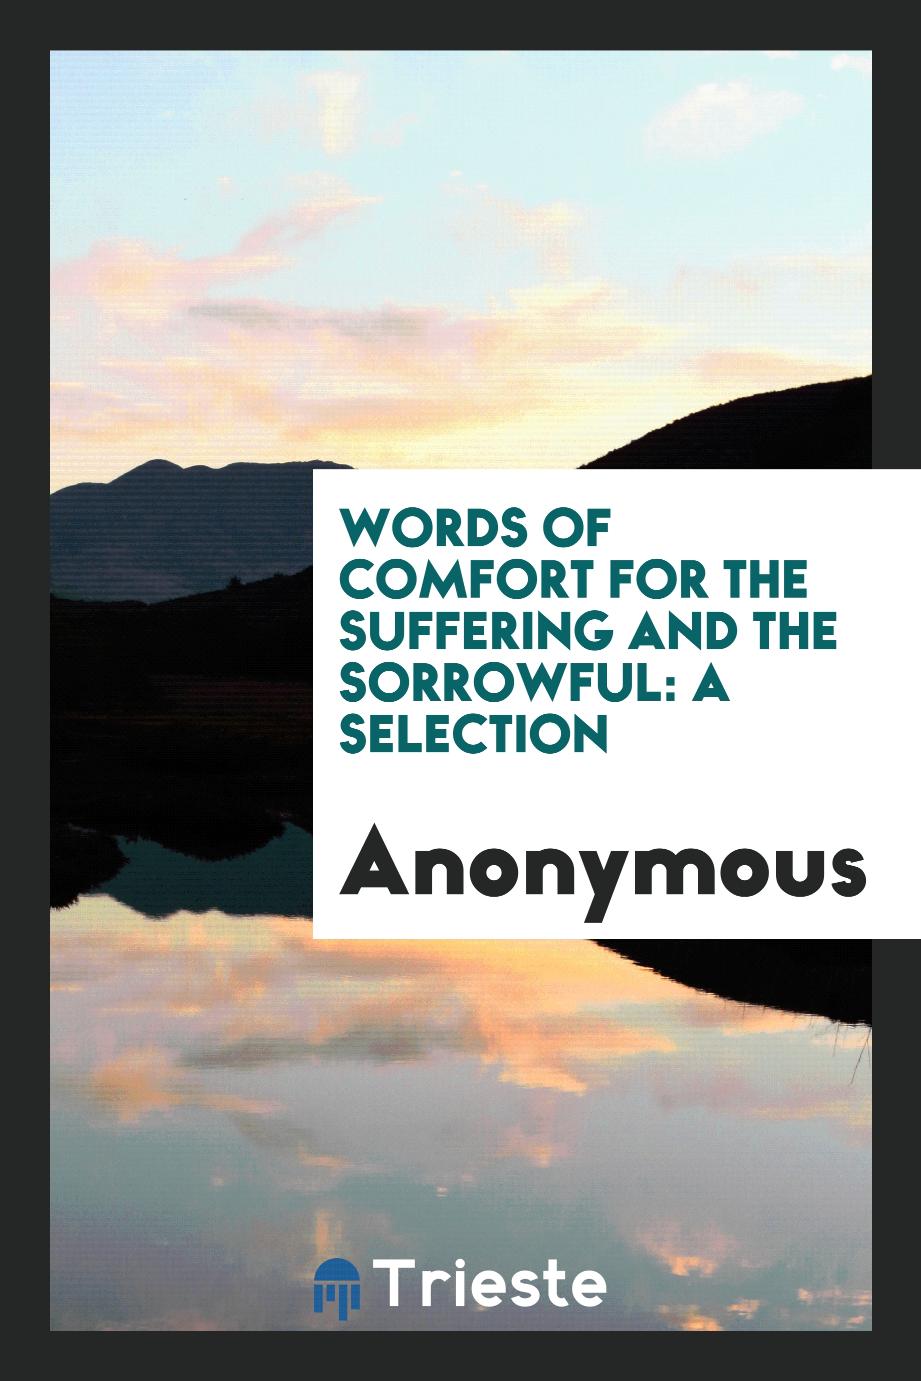 Words of Comfort for the Suffering and the Sorrowful: A Selection